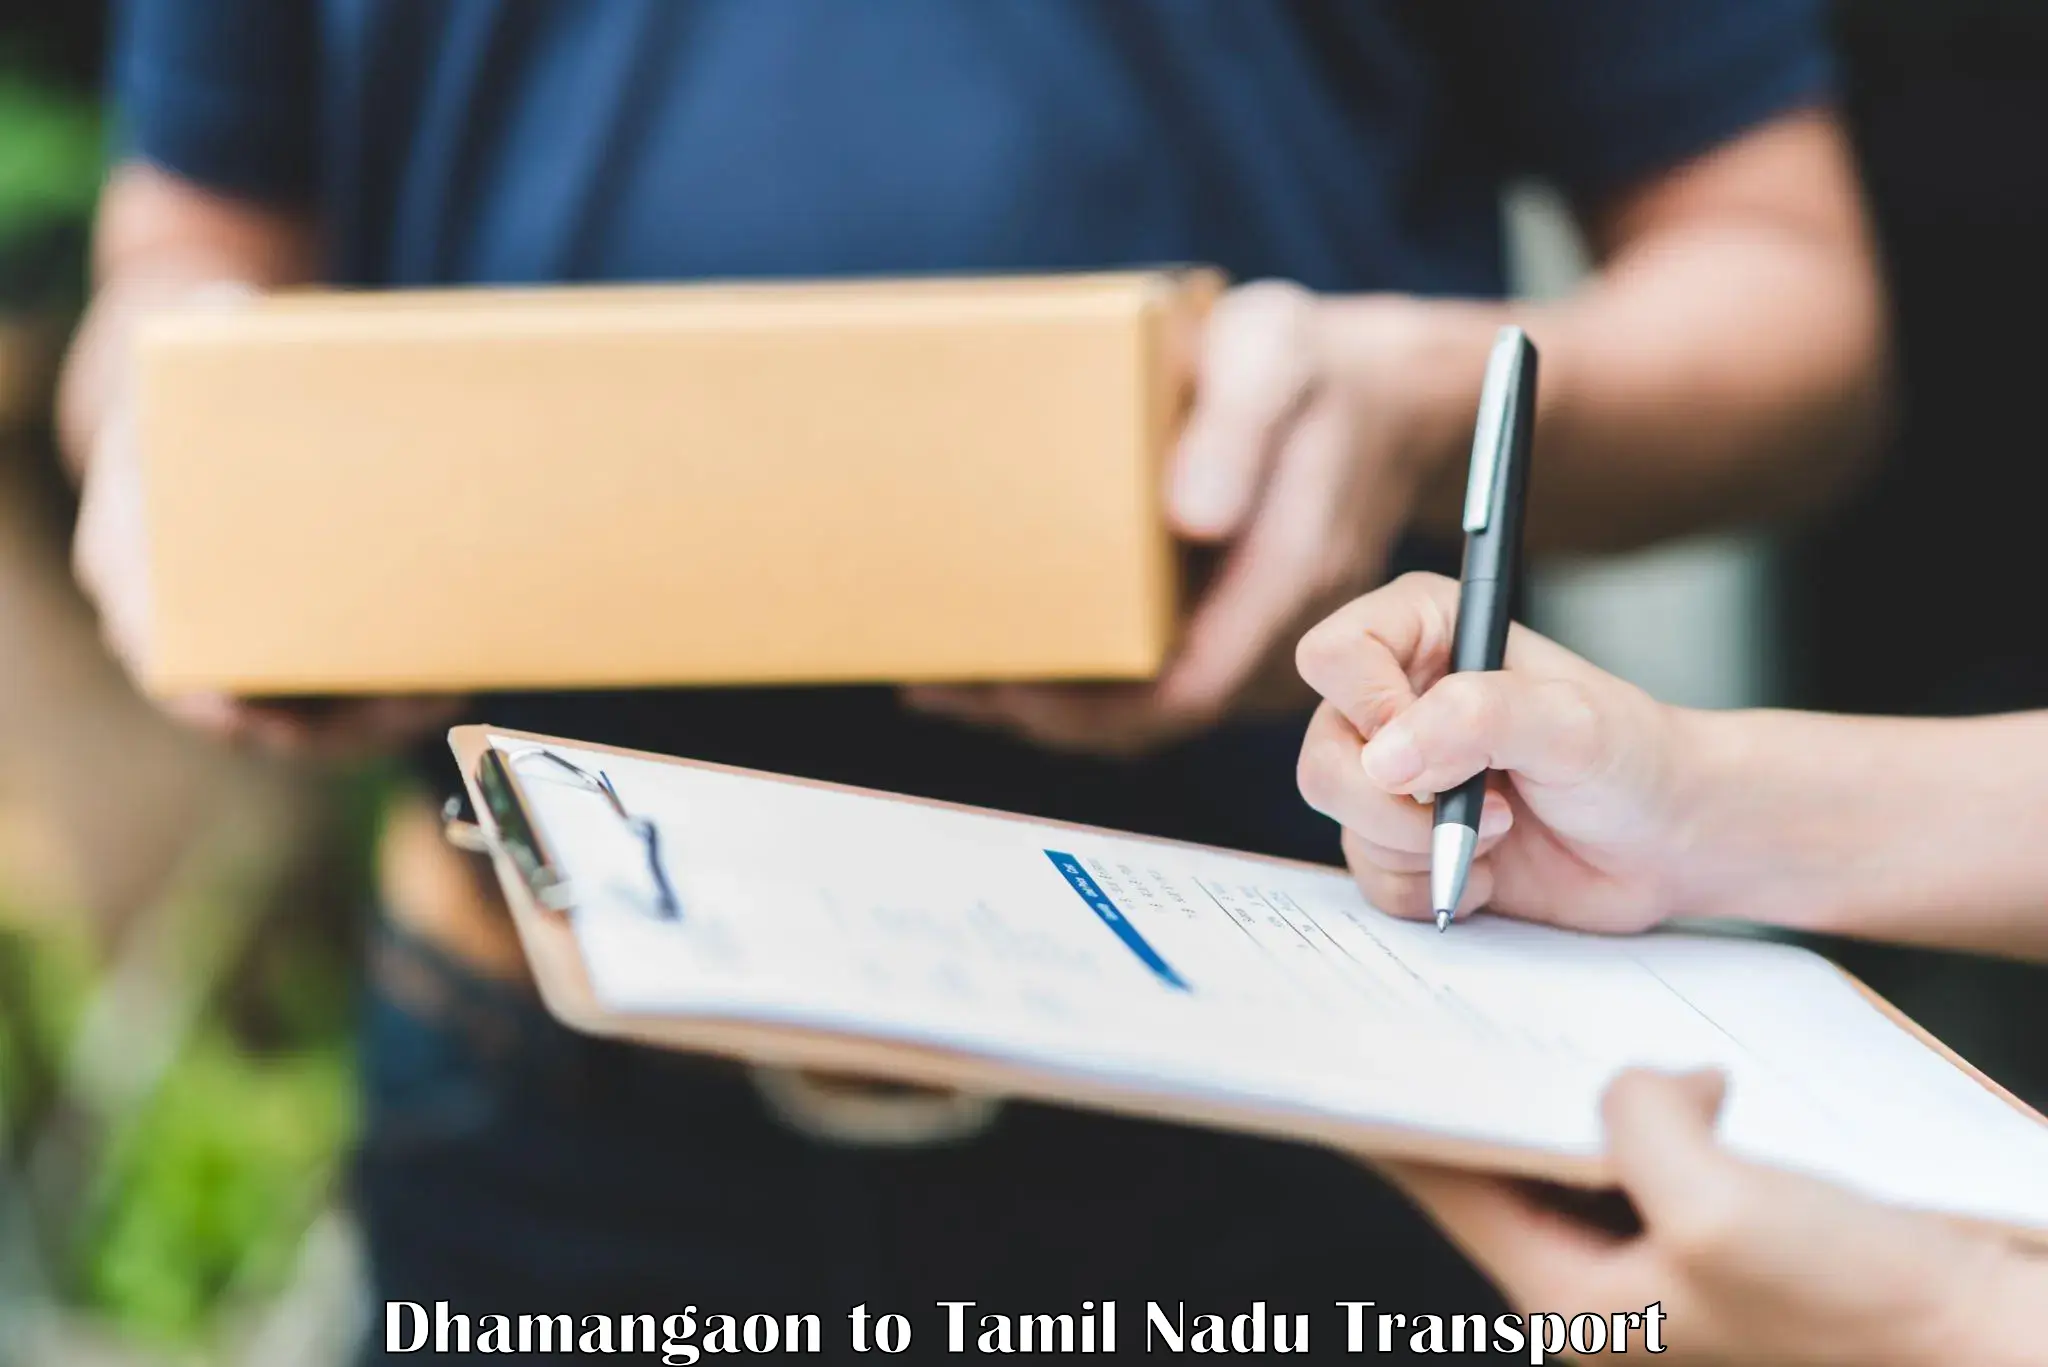 Nearby transport service Dhamangaon to Trichy